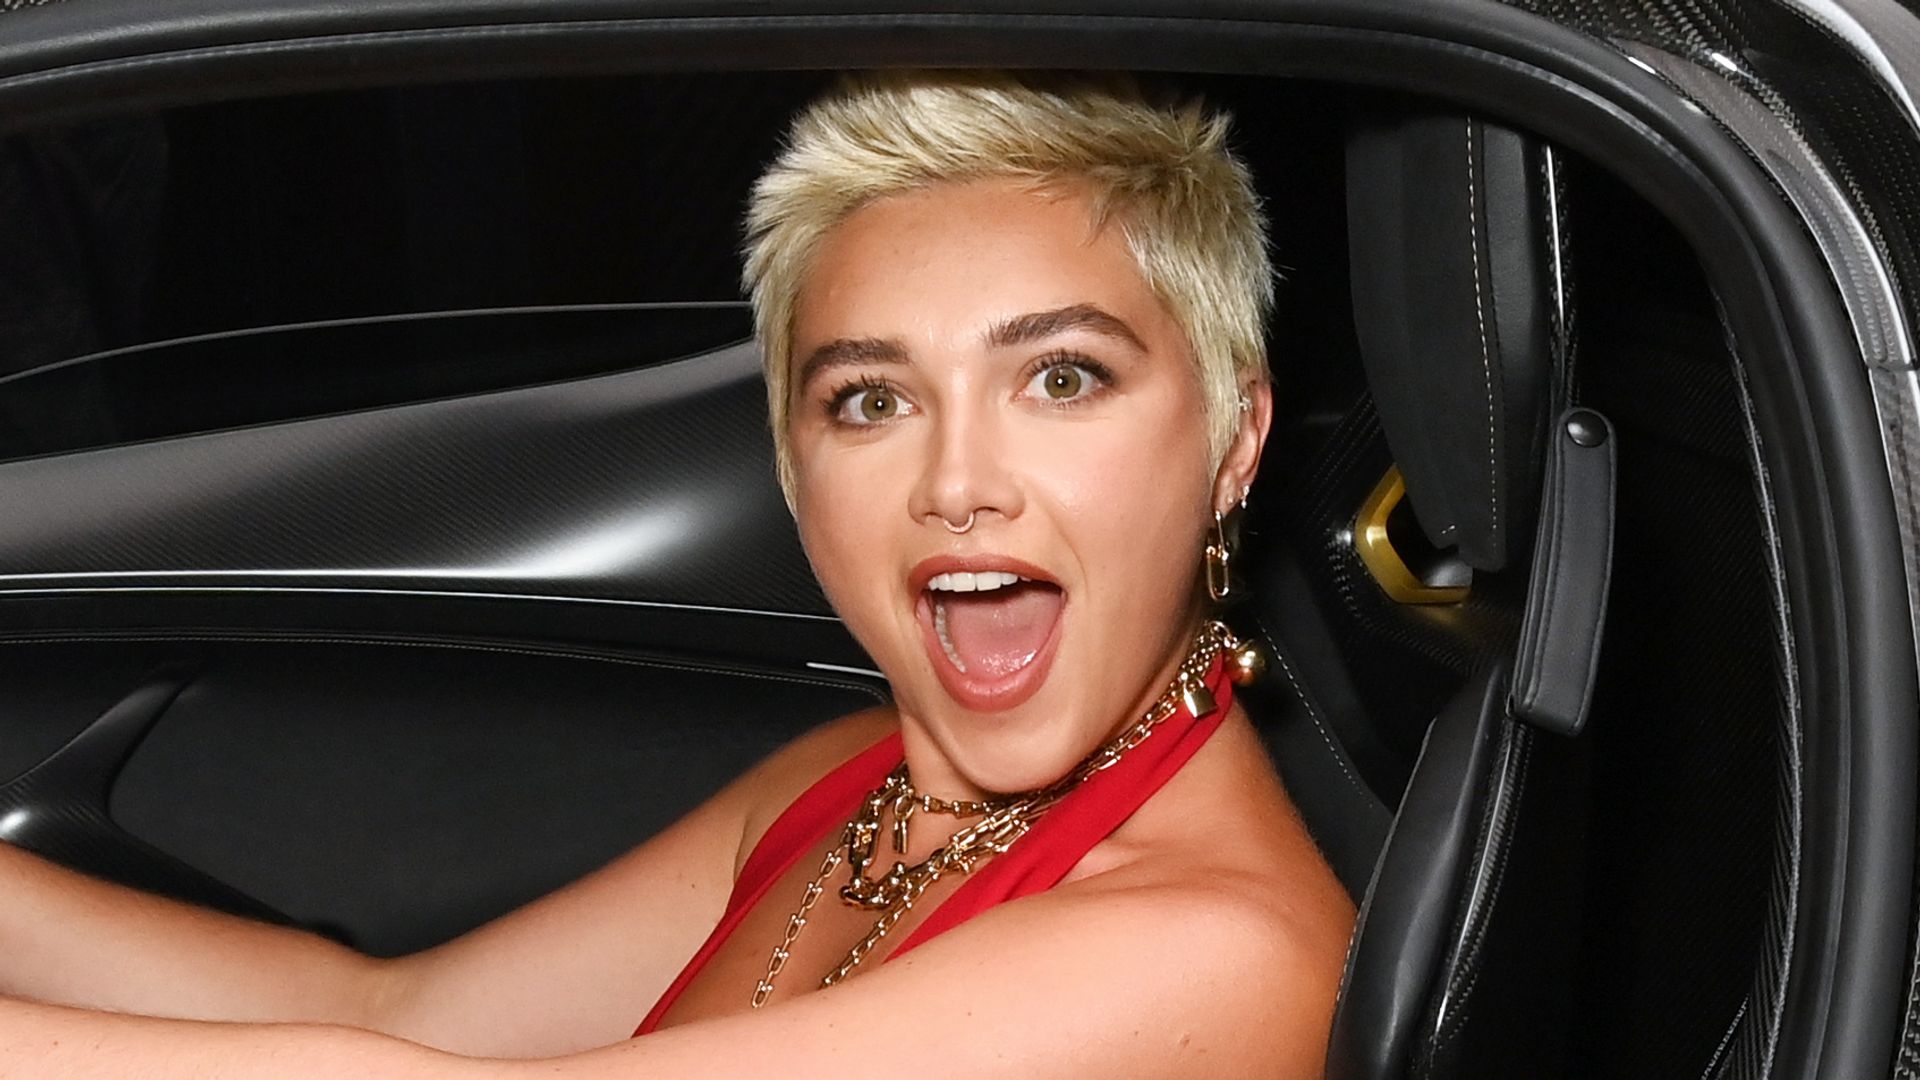 Florence Pugh smiling widely in a car